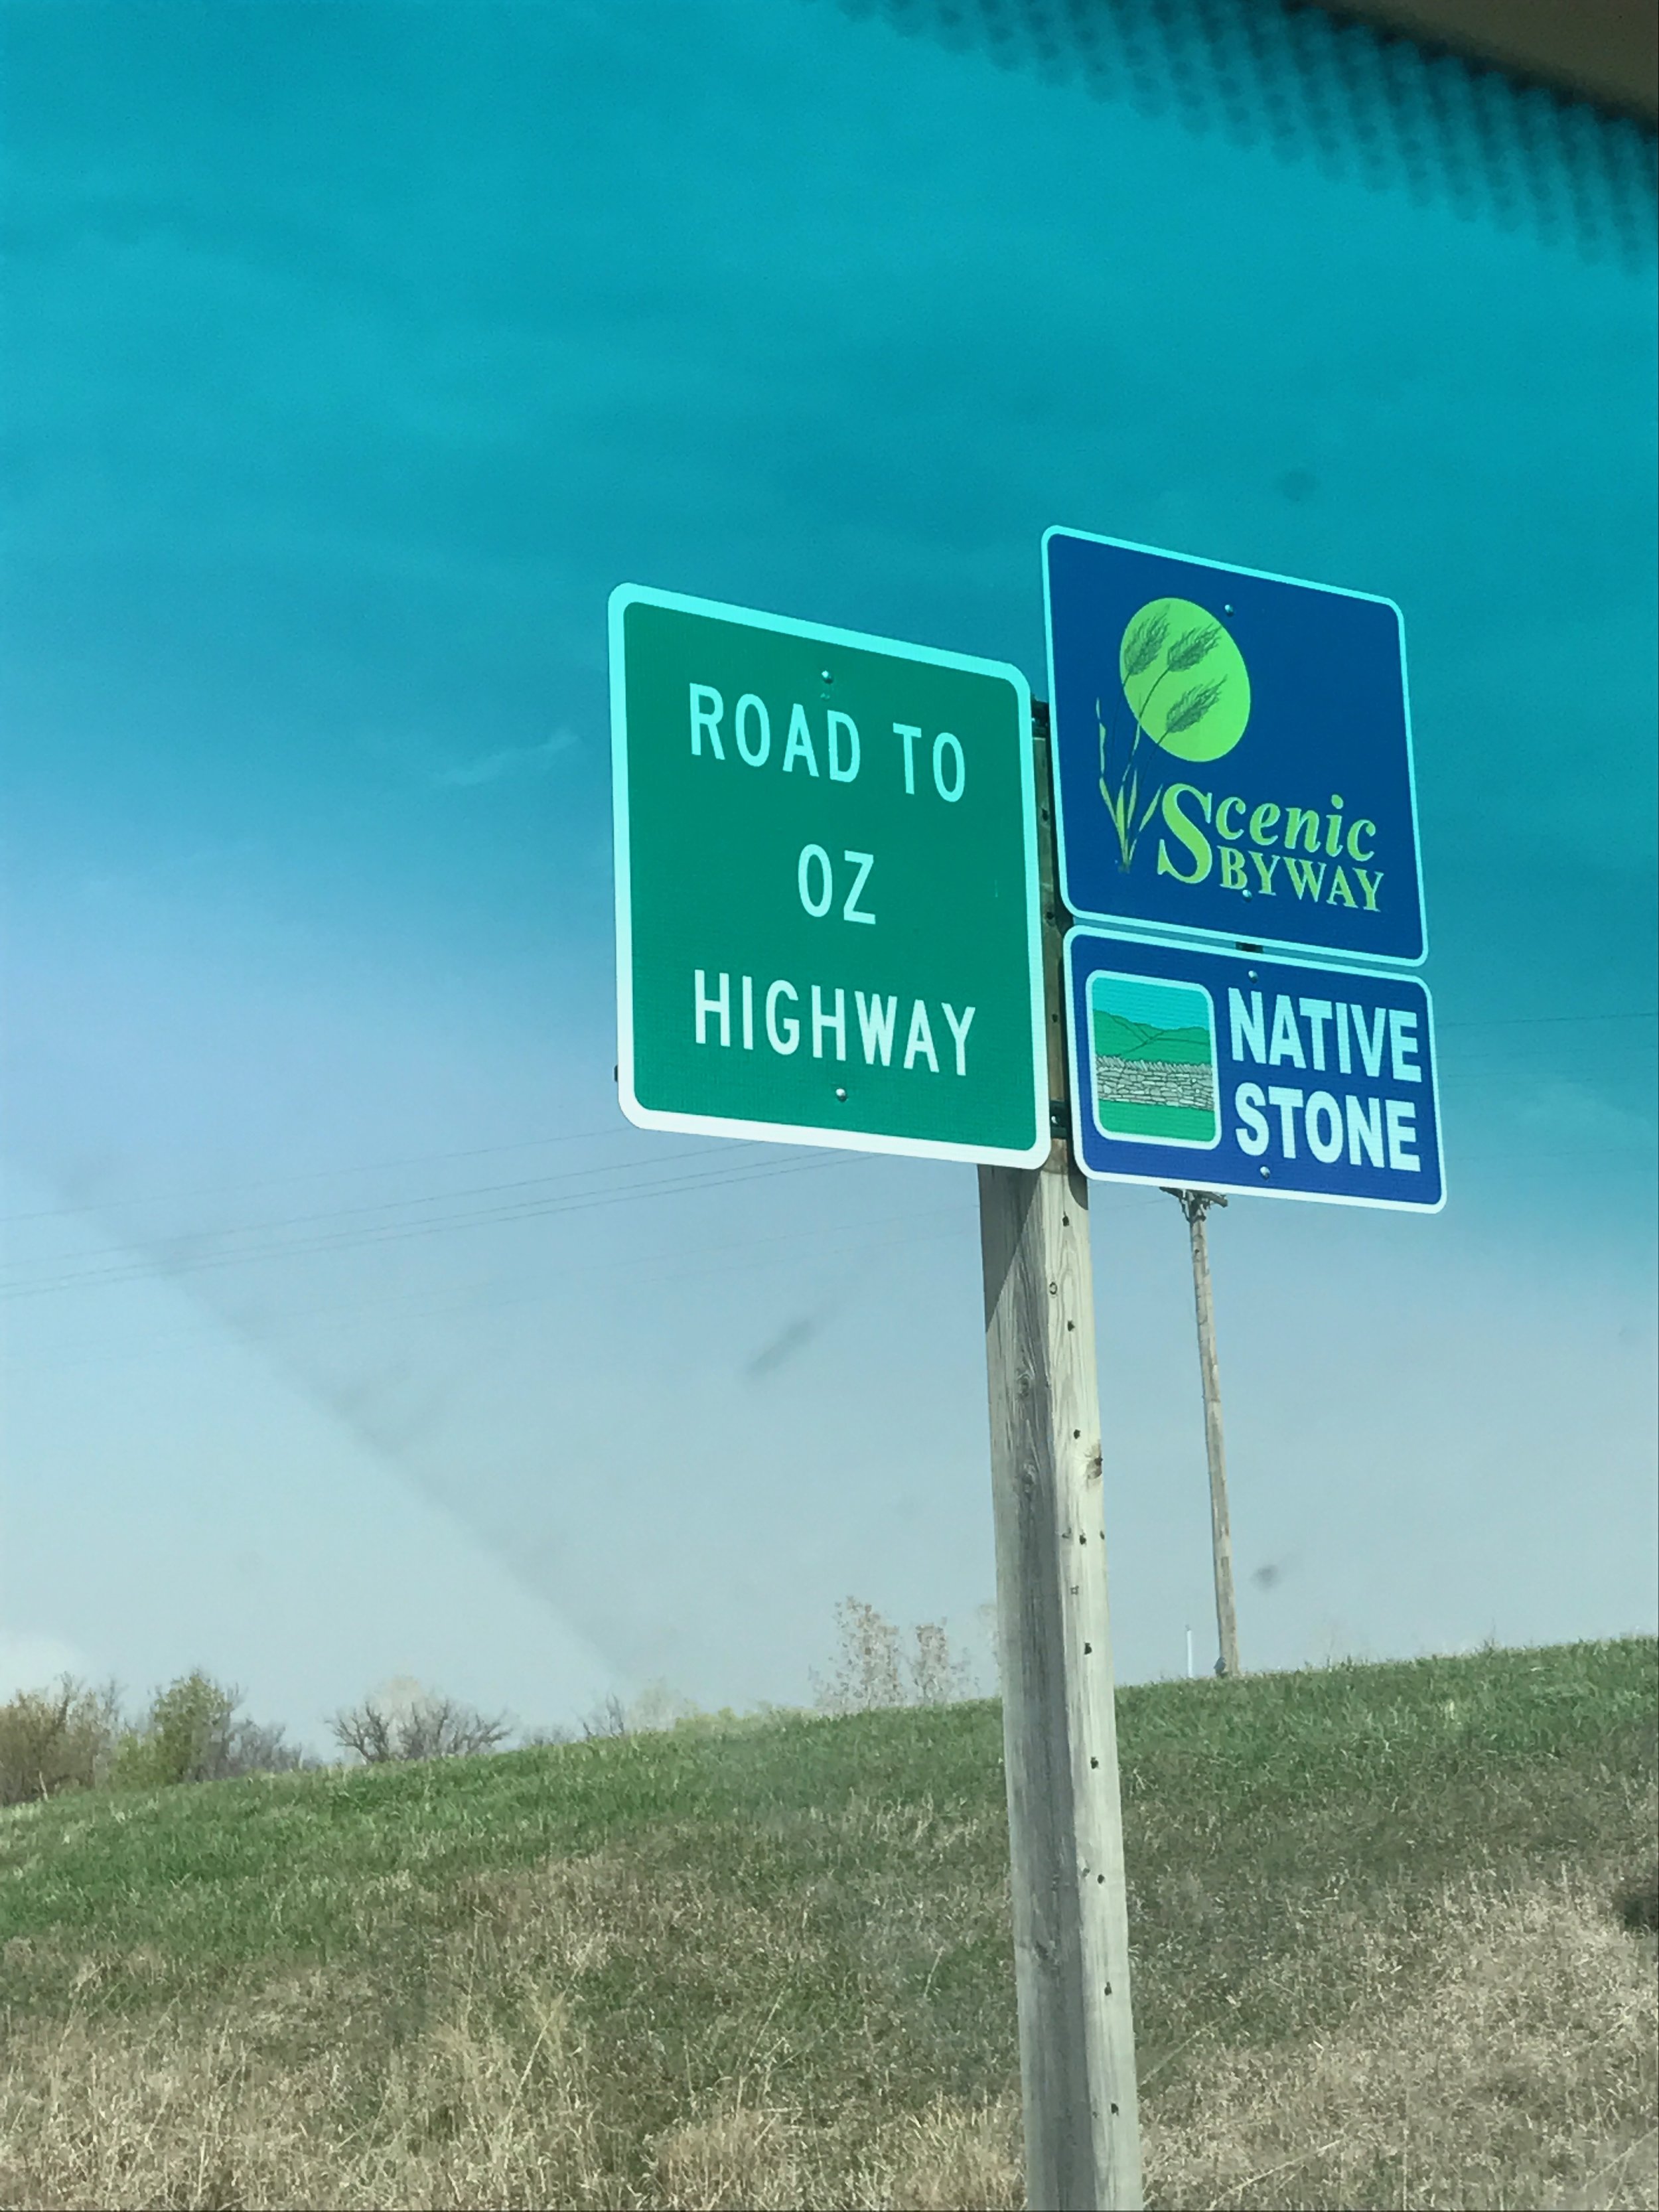   Of course there is a road to Oz in Kansas.  